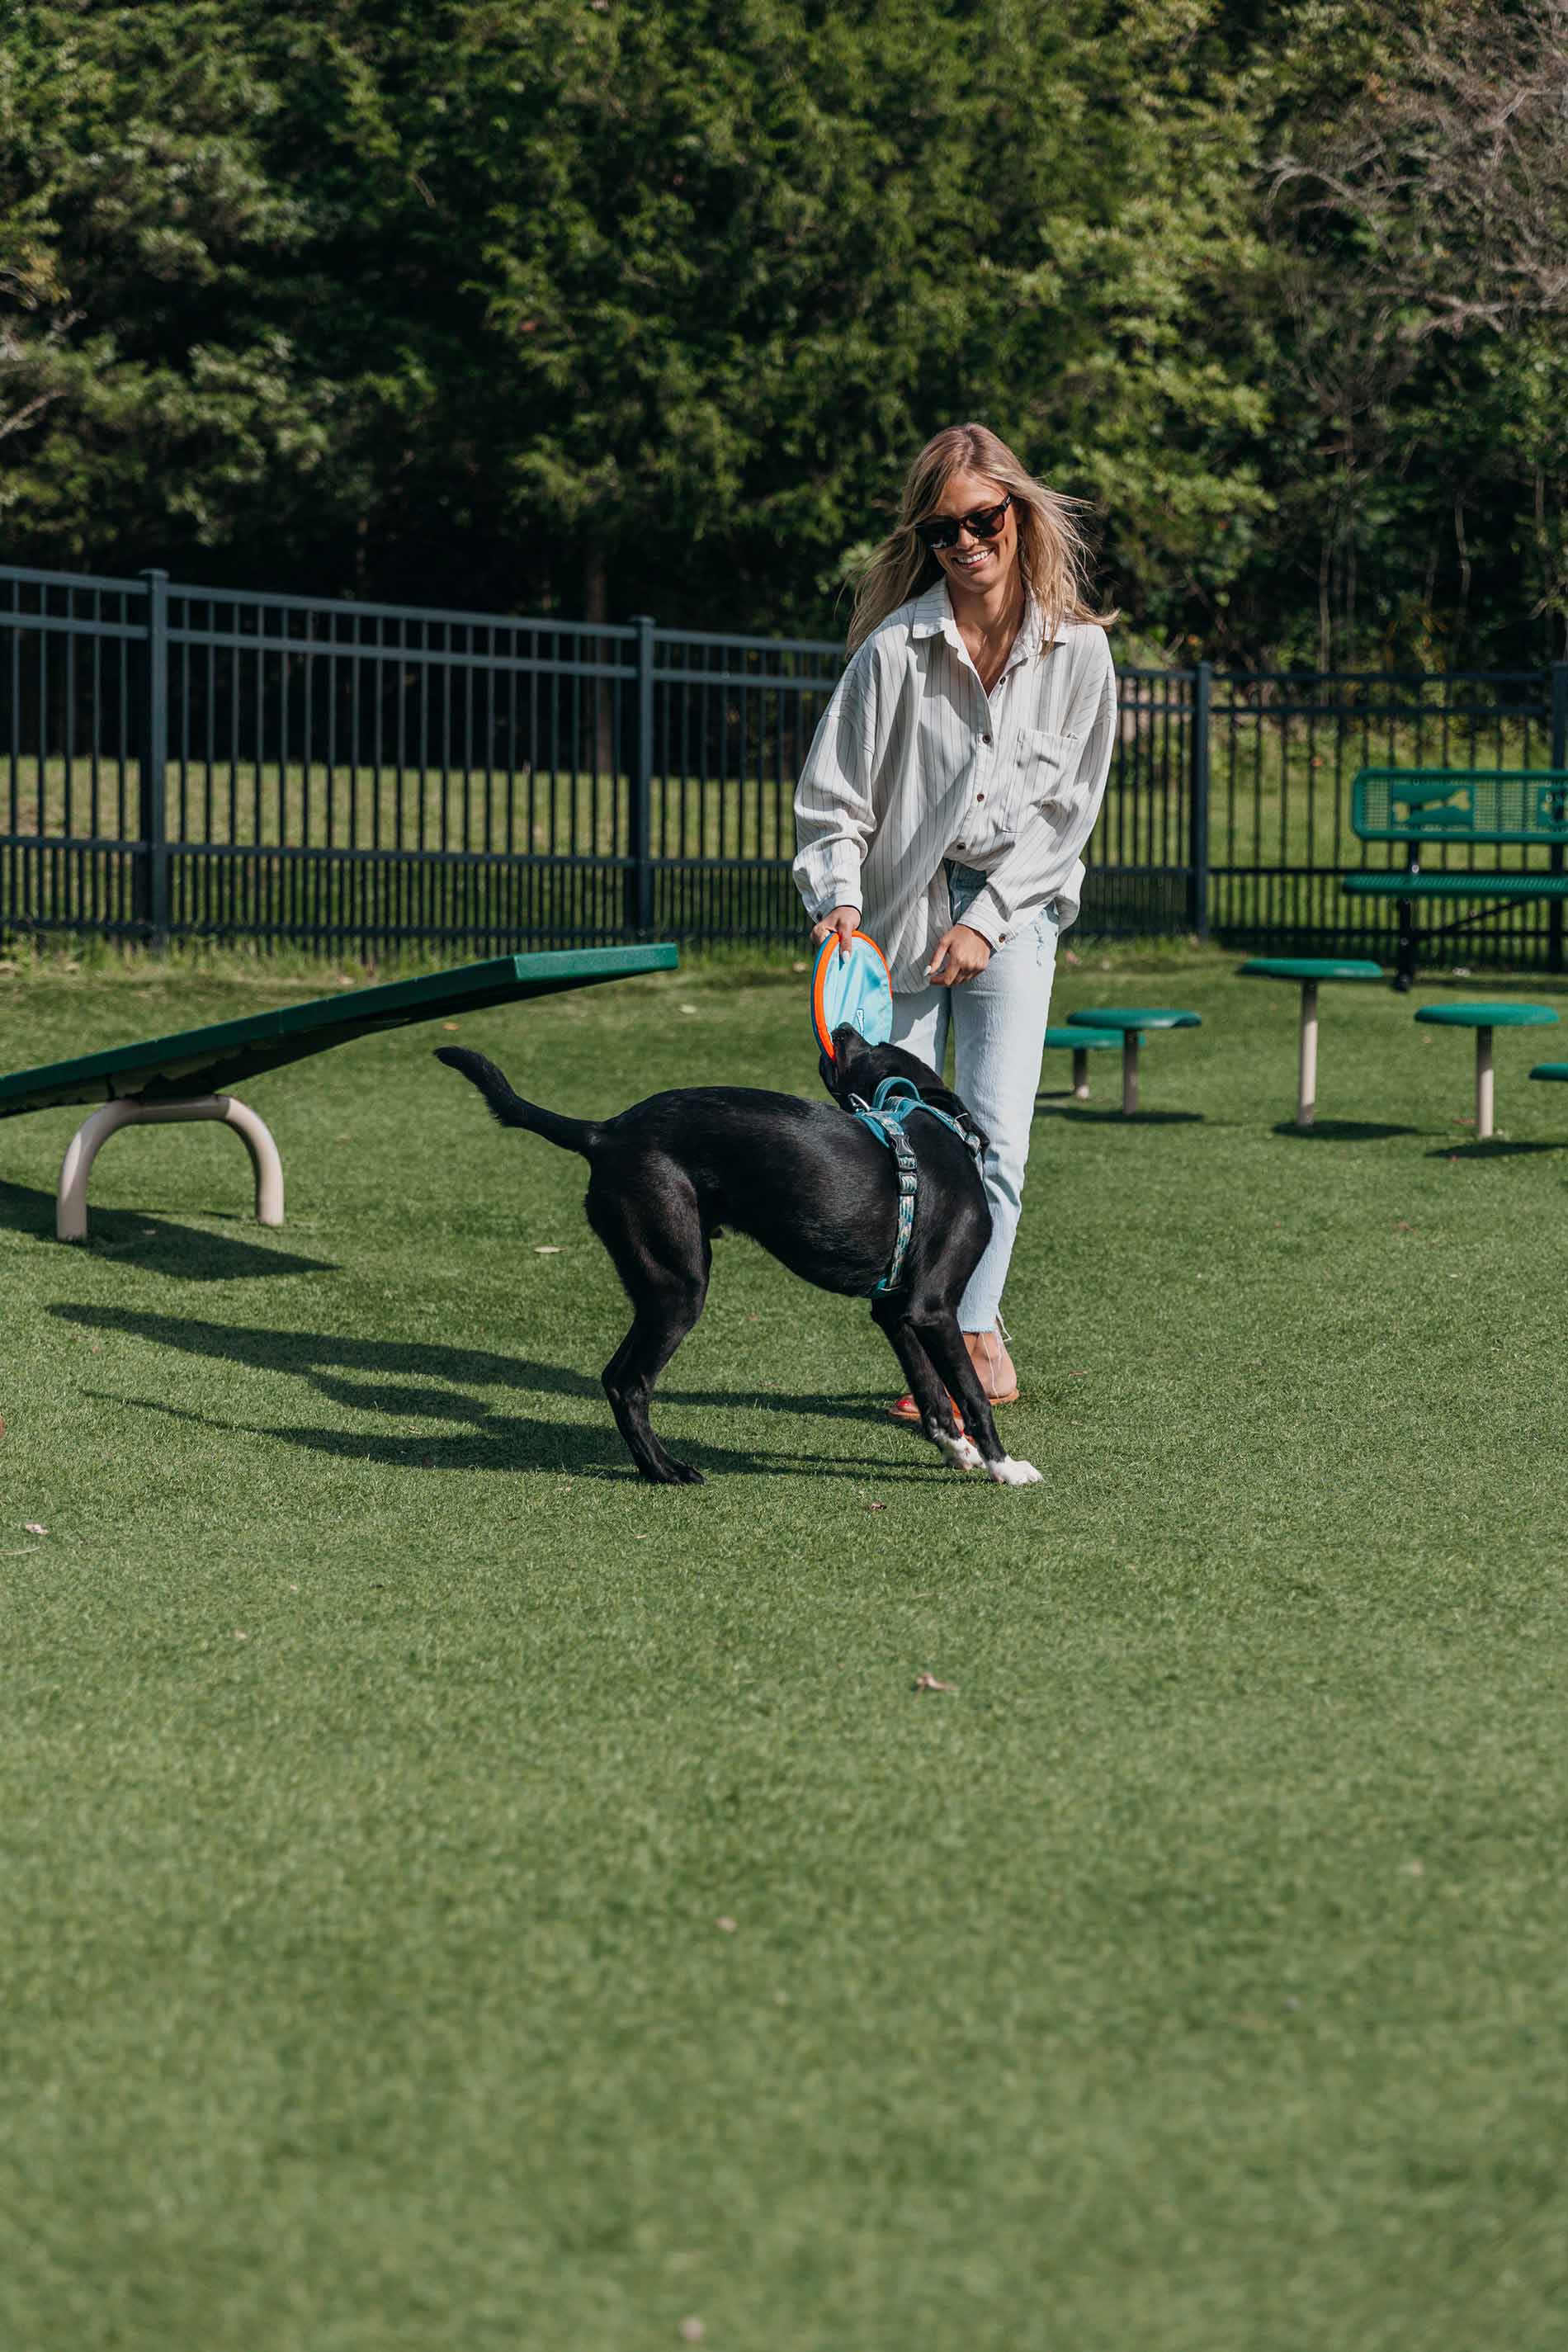 Lenox Farms woman plays with dog at dog park